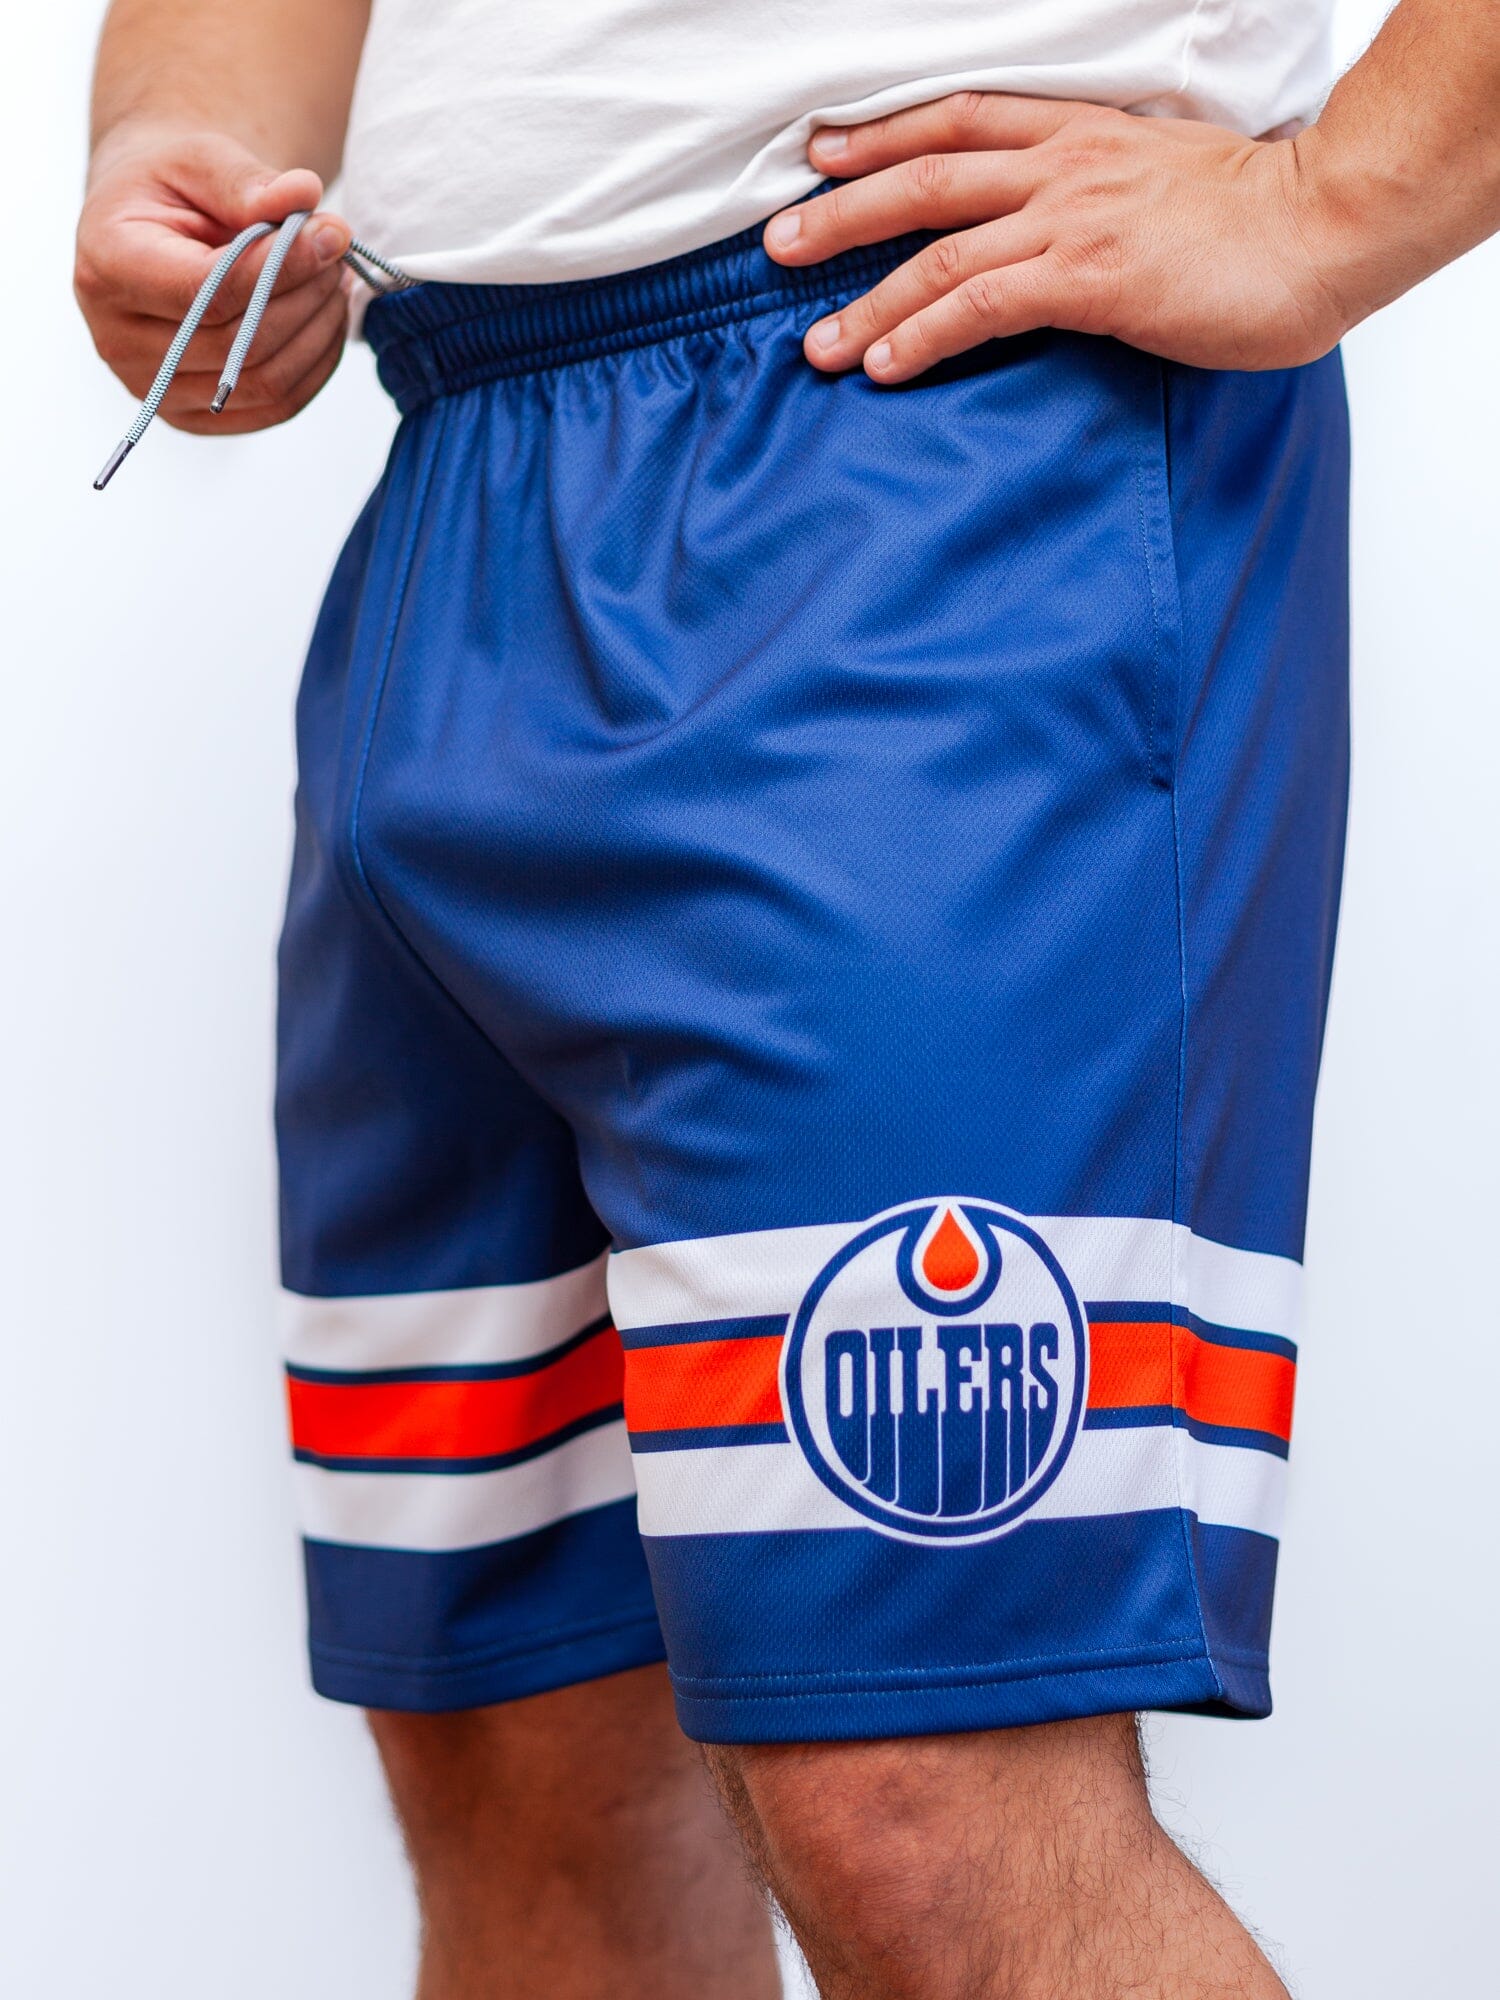 EDM_OILERS_SHORTS_FRONT_2